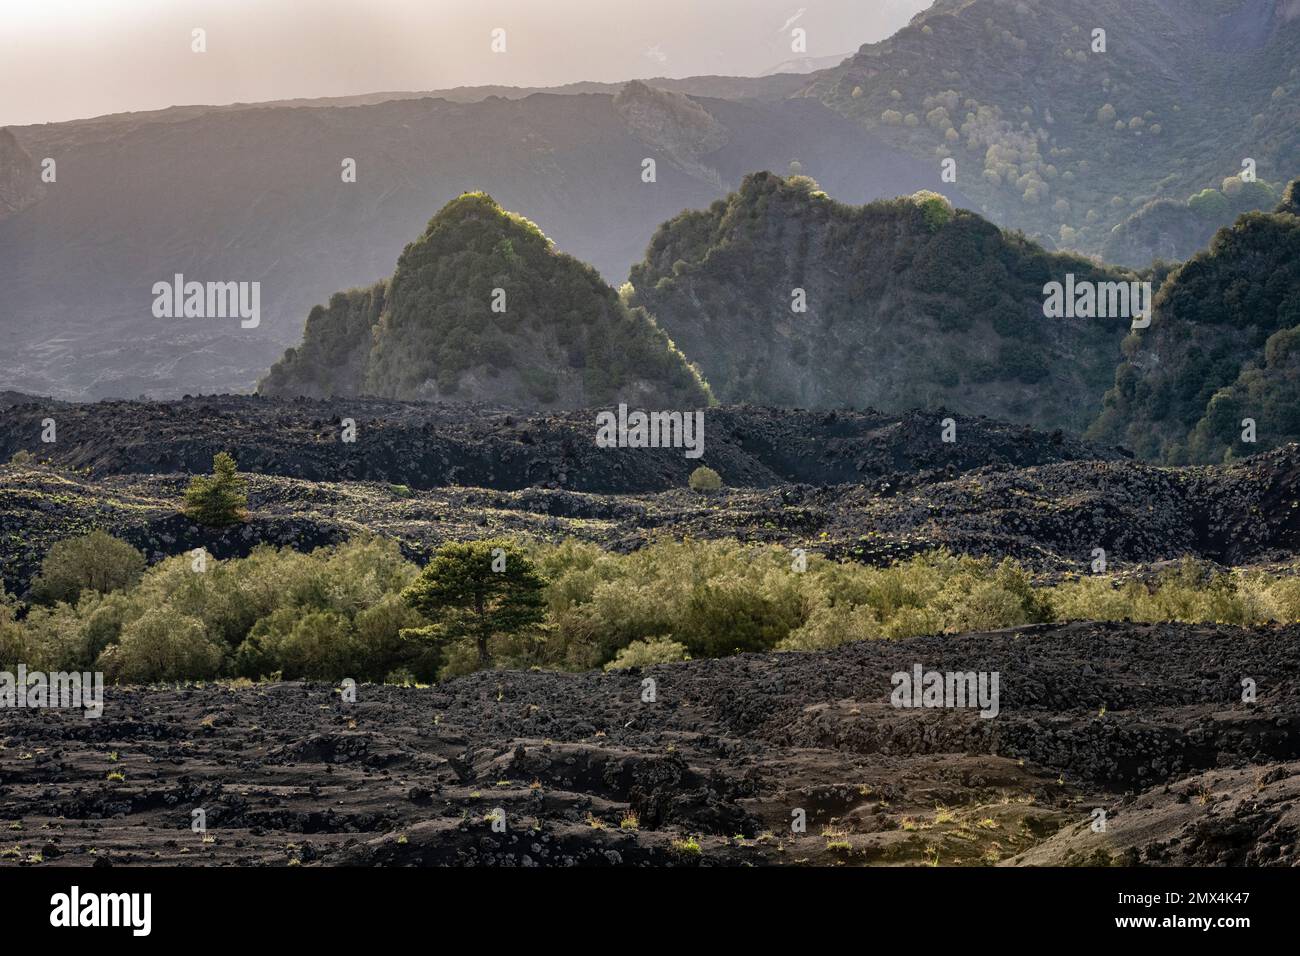 The wild and desolate volcanic lava landscape of the vast Valle del Bove on Mount Etna, Sicily, Italy Stock Photo